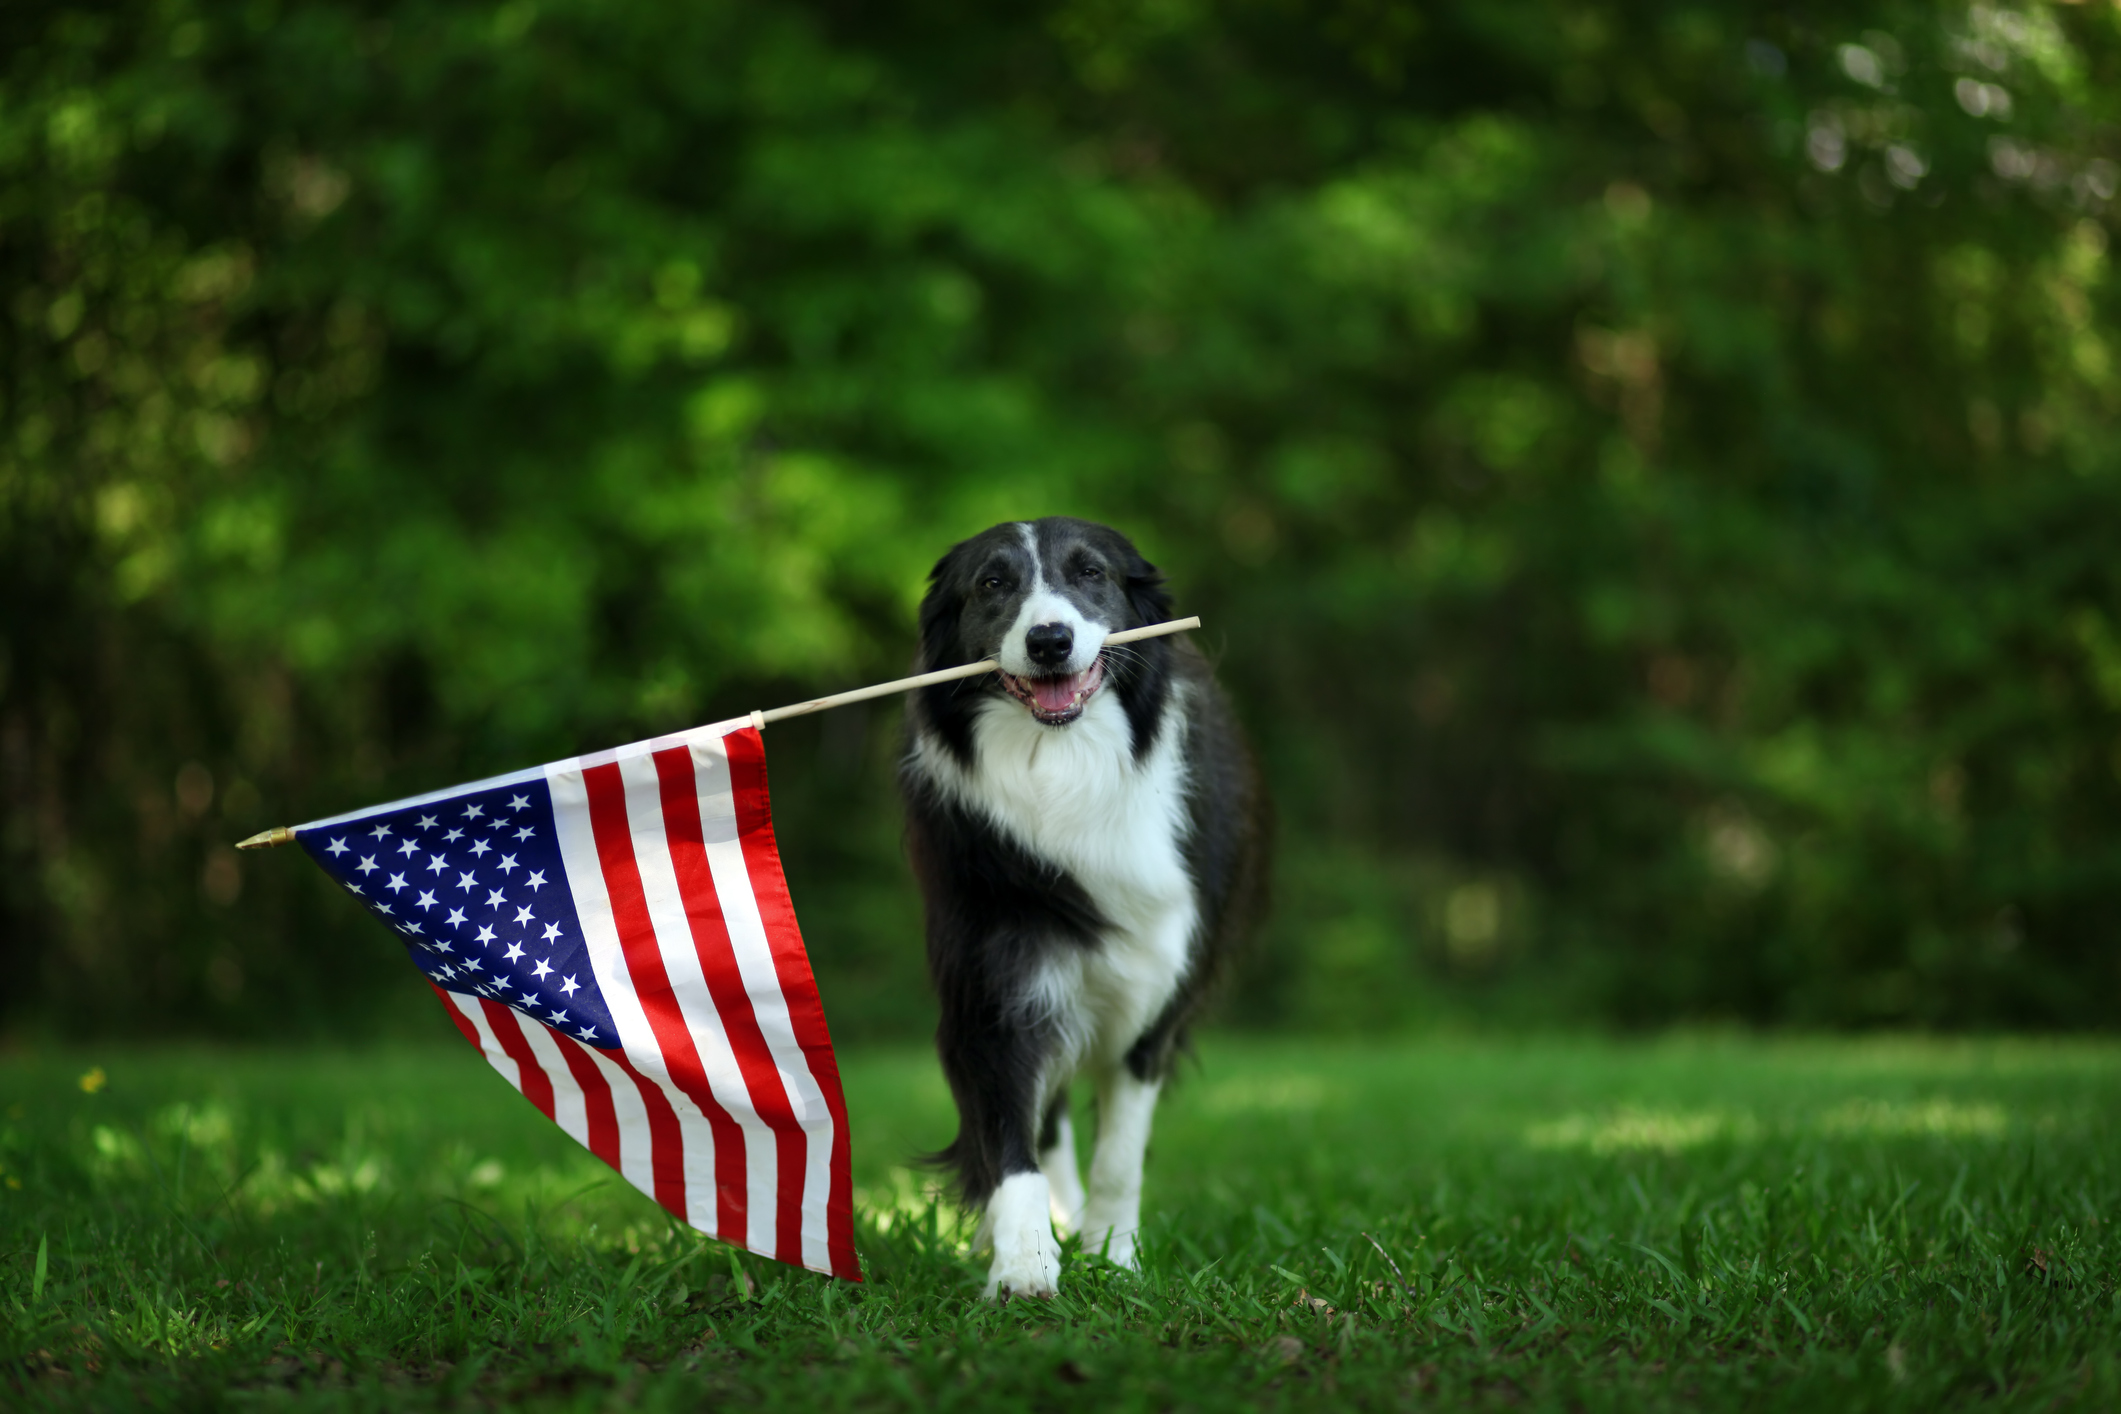 Happy border collie carrying USA flag